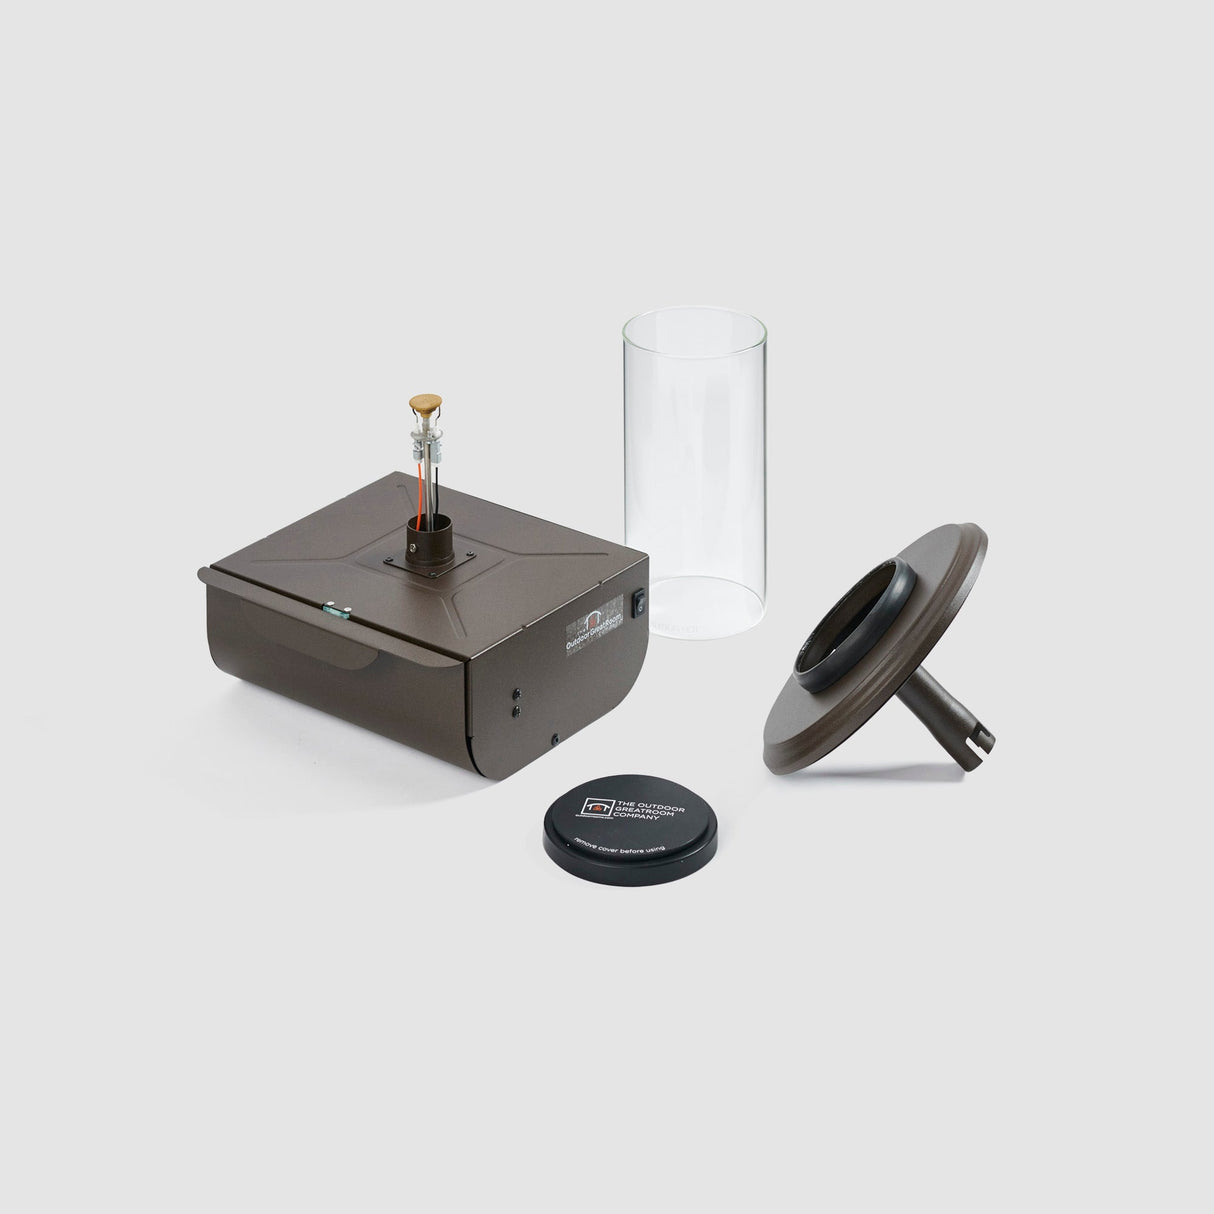 Components of the Intrigue Table Top Outdoor Lantern on a grey background